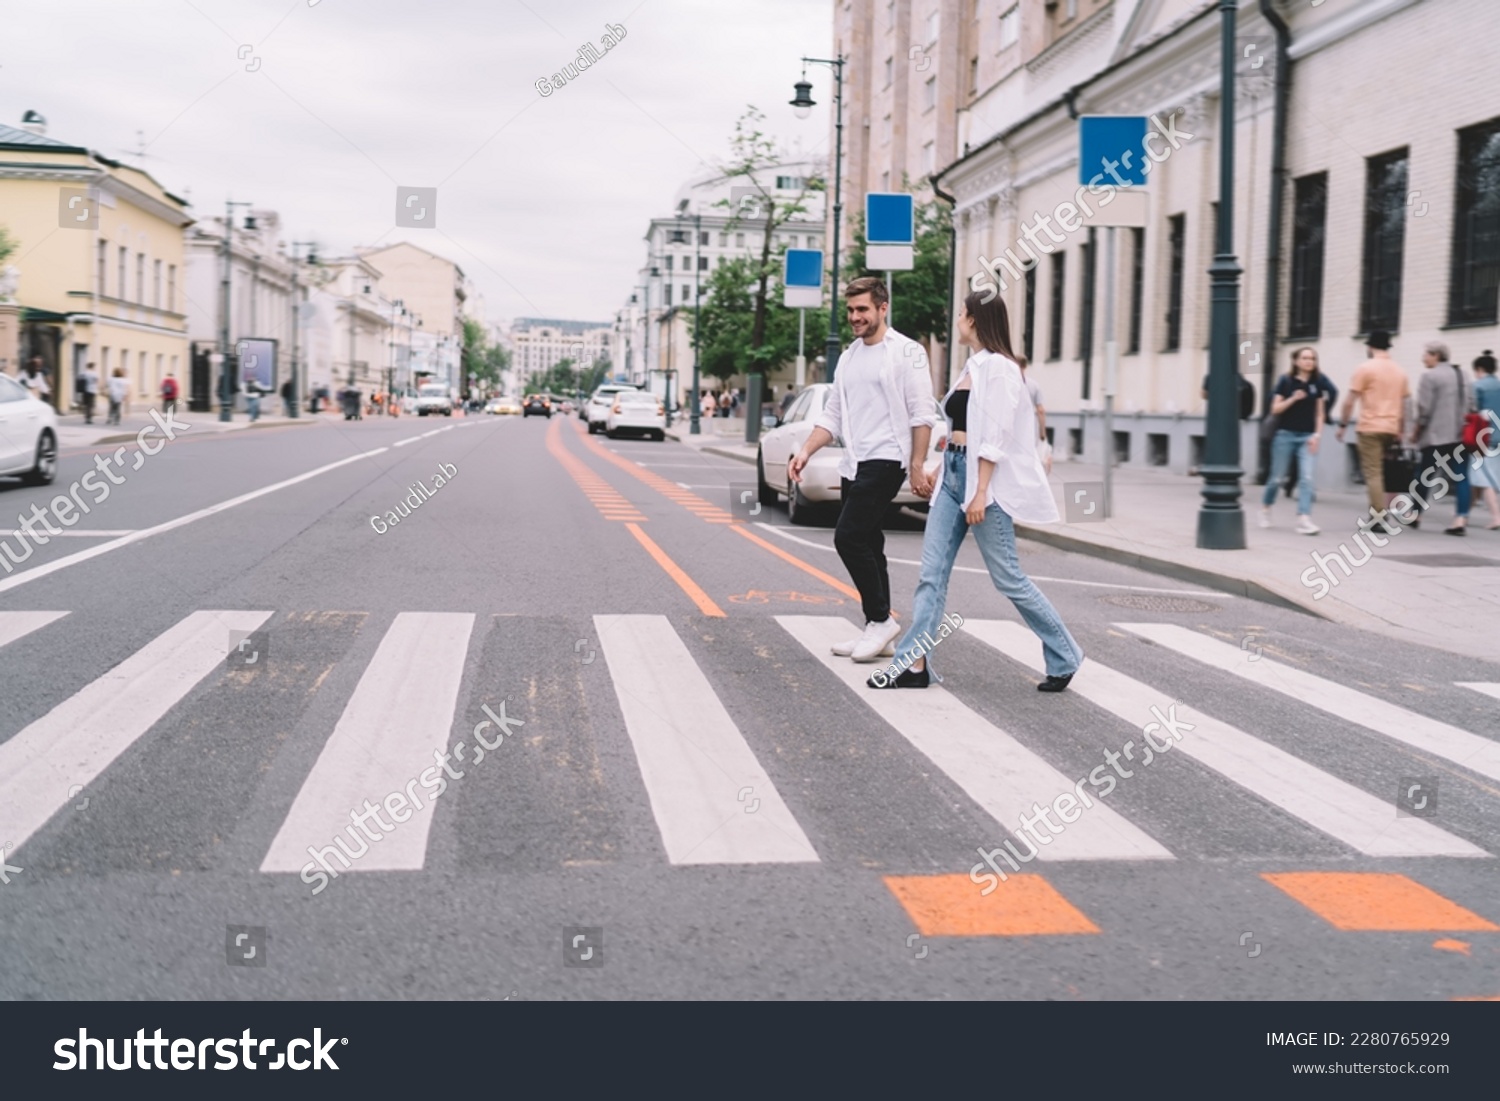 Full body of young man and woman in casual clothes holding hands while crossing street on crosswalk during date in city #2280765929